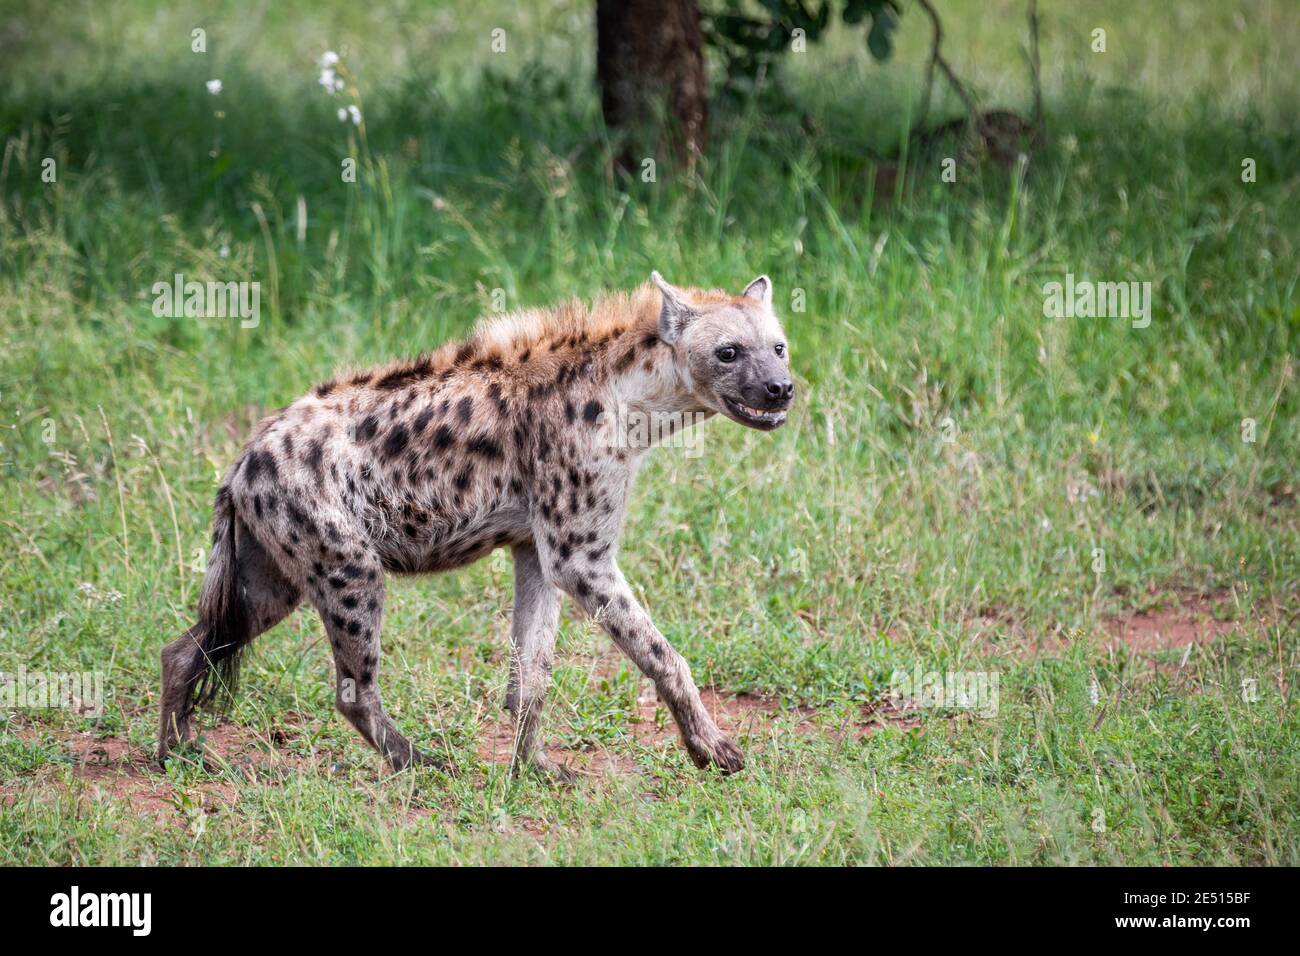 In south african savanna, a large male hyena is hunting among green bushes Stock Photo